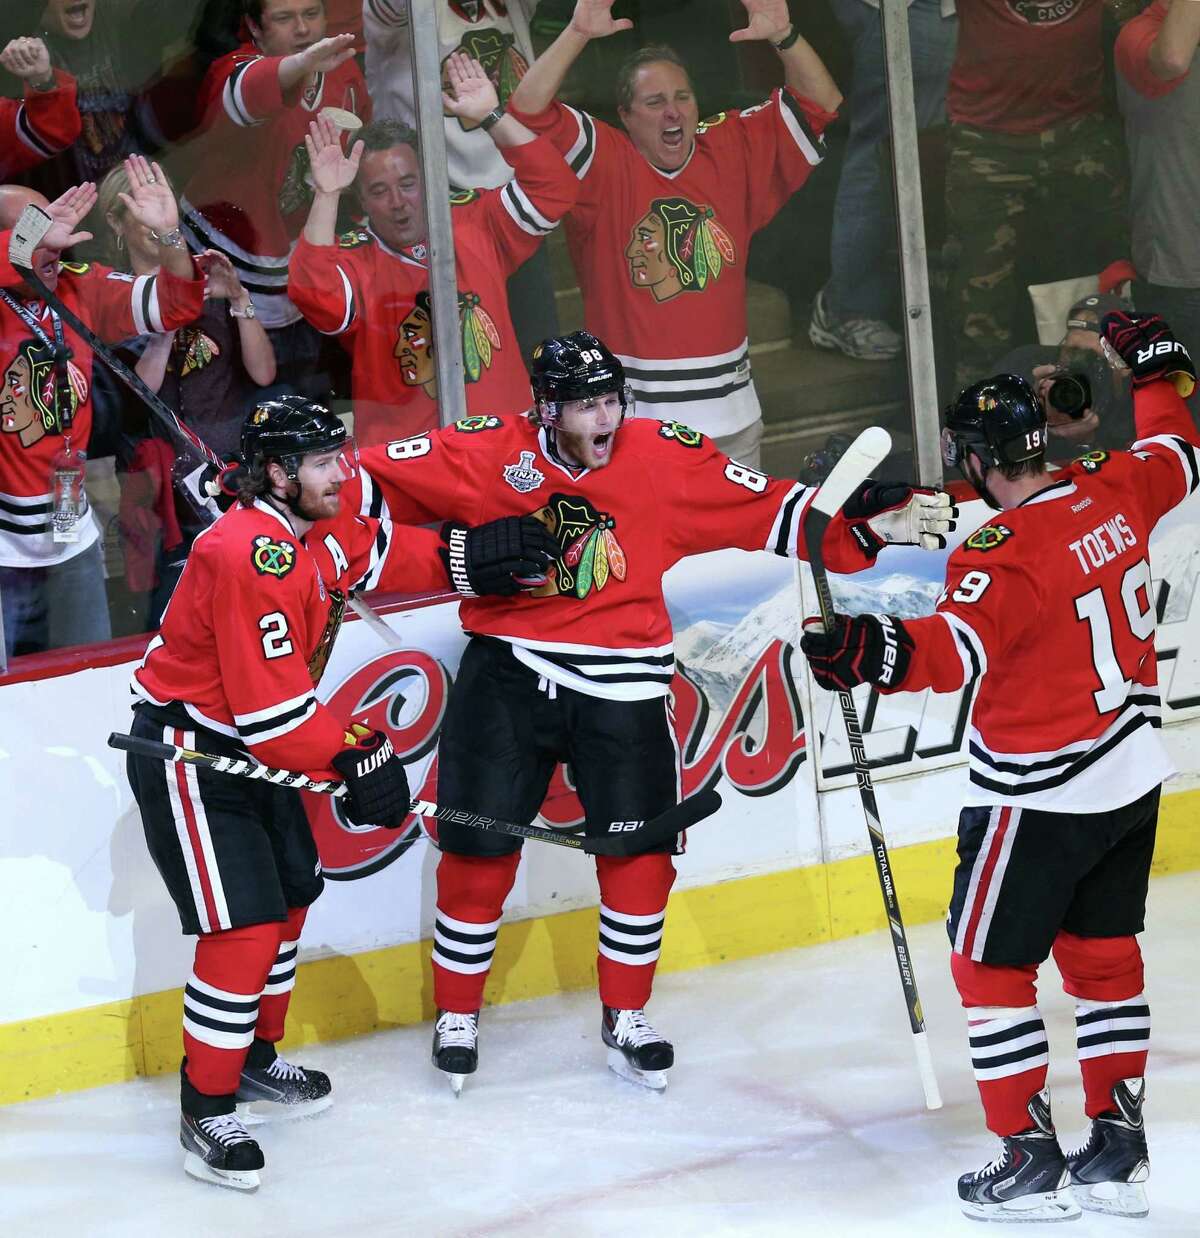 Chicago's Patrick Kane leads the cheers with help from teammates Duncan Keith (2) and Jonathan Toews (19) after scoring his second goal in the second period.